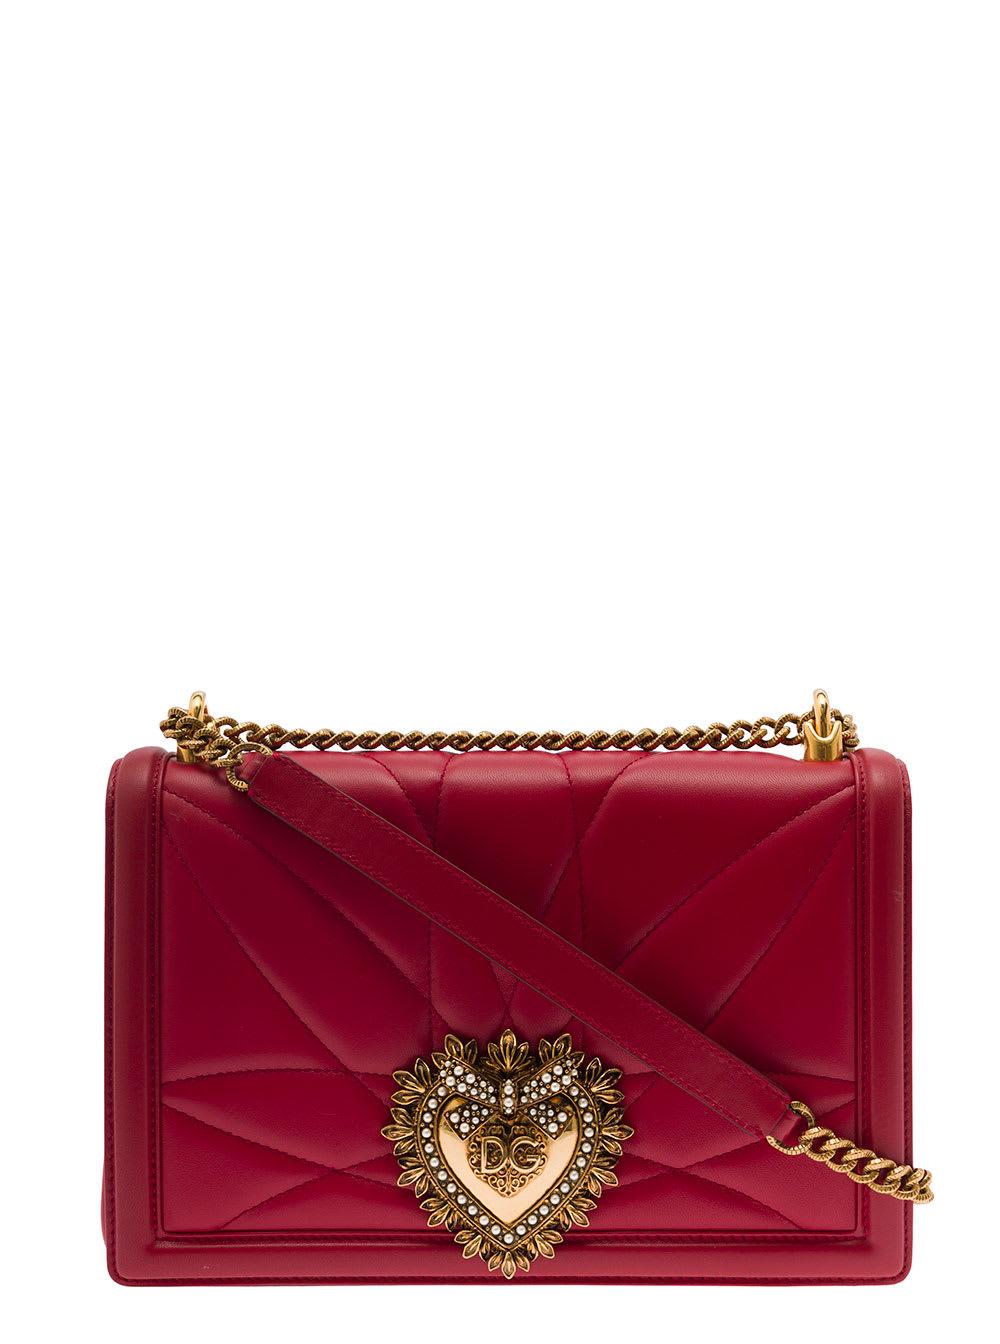 Dolce & Gabbana Women's Devotion Leather Top Handle Bag Red